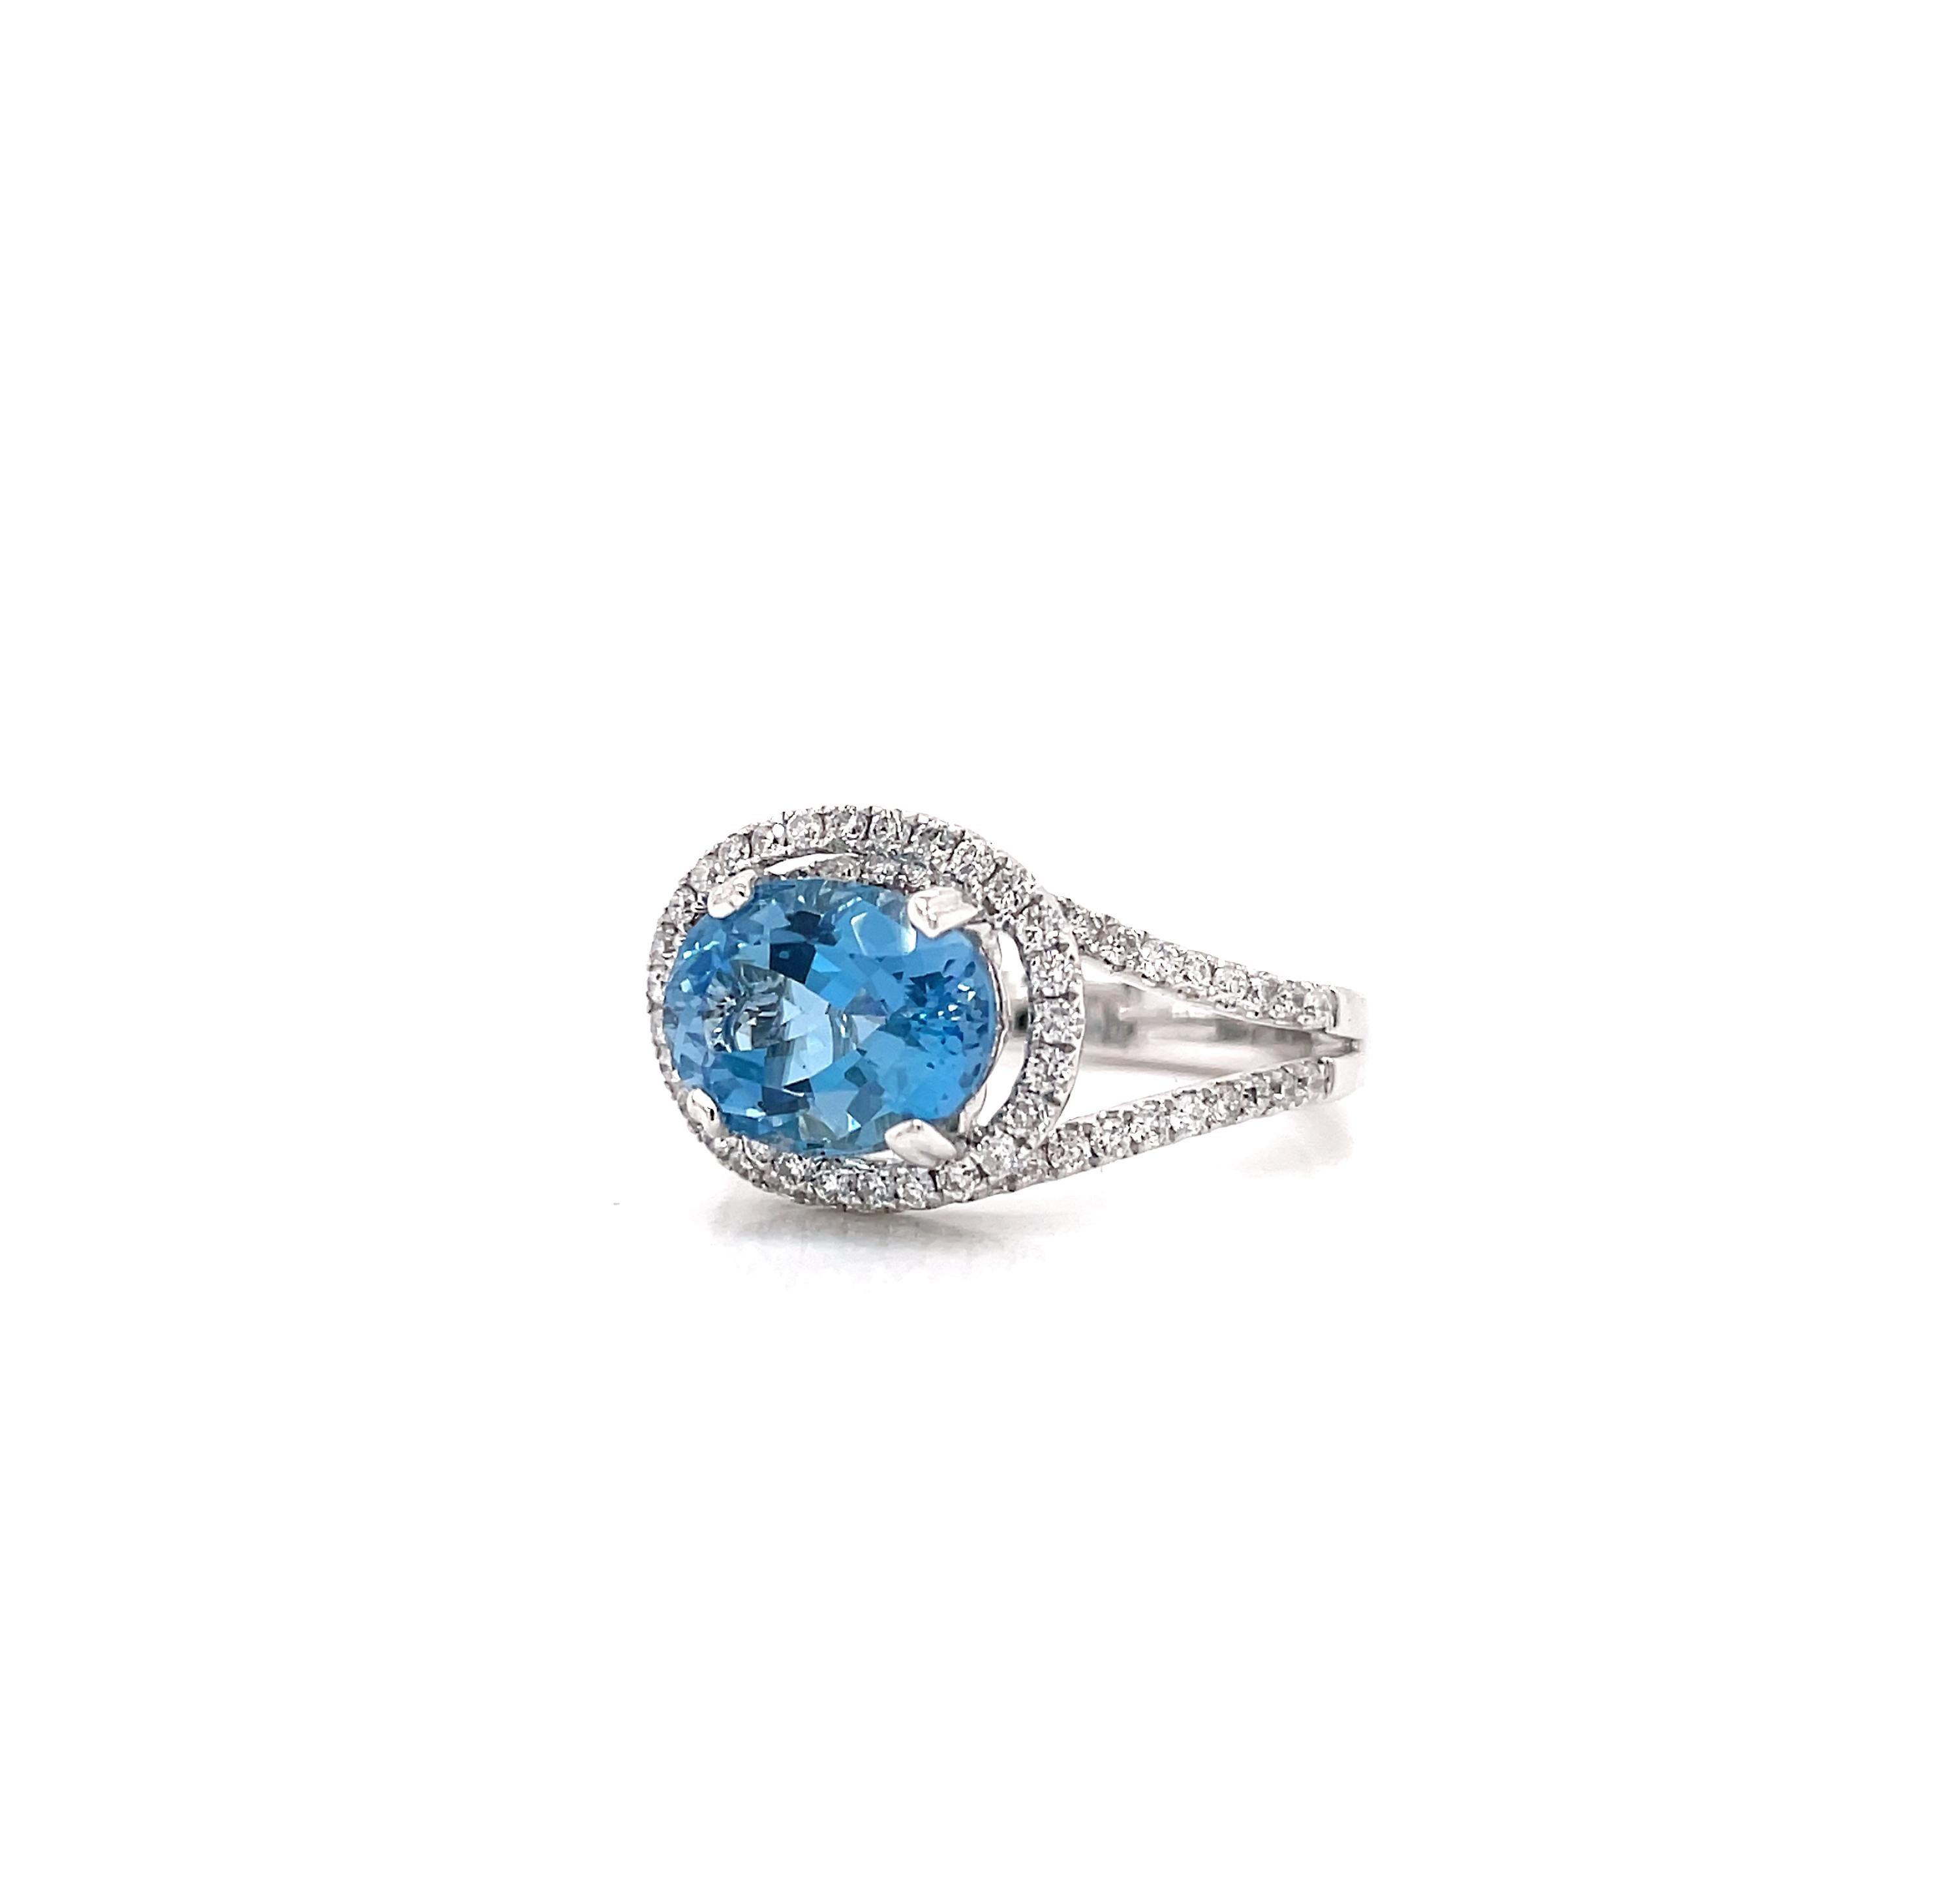 This gorgeous dress ring features a stunning oval aquamarine weighing 2.70ct mounted in a four claw, open back setting, The gemstone is beautifully encased in the centre of a diamond set swirled mount bringing the gemstones colour to life. The